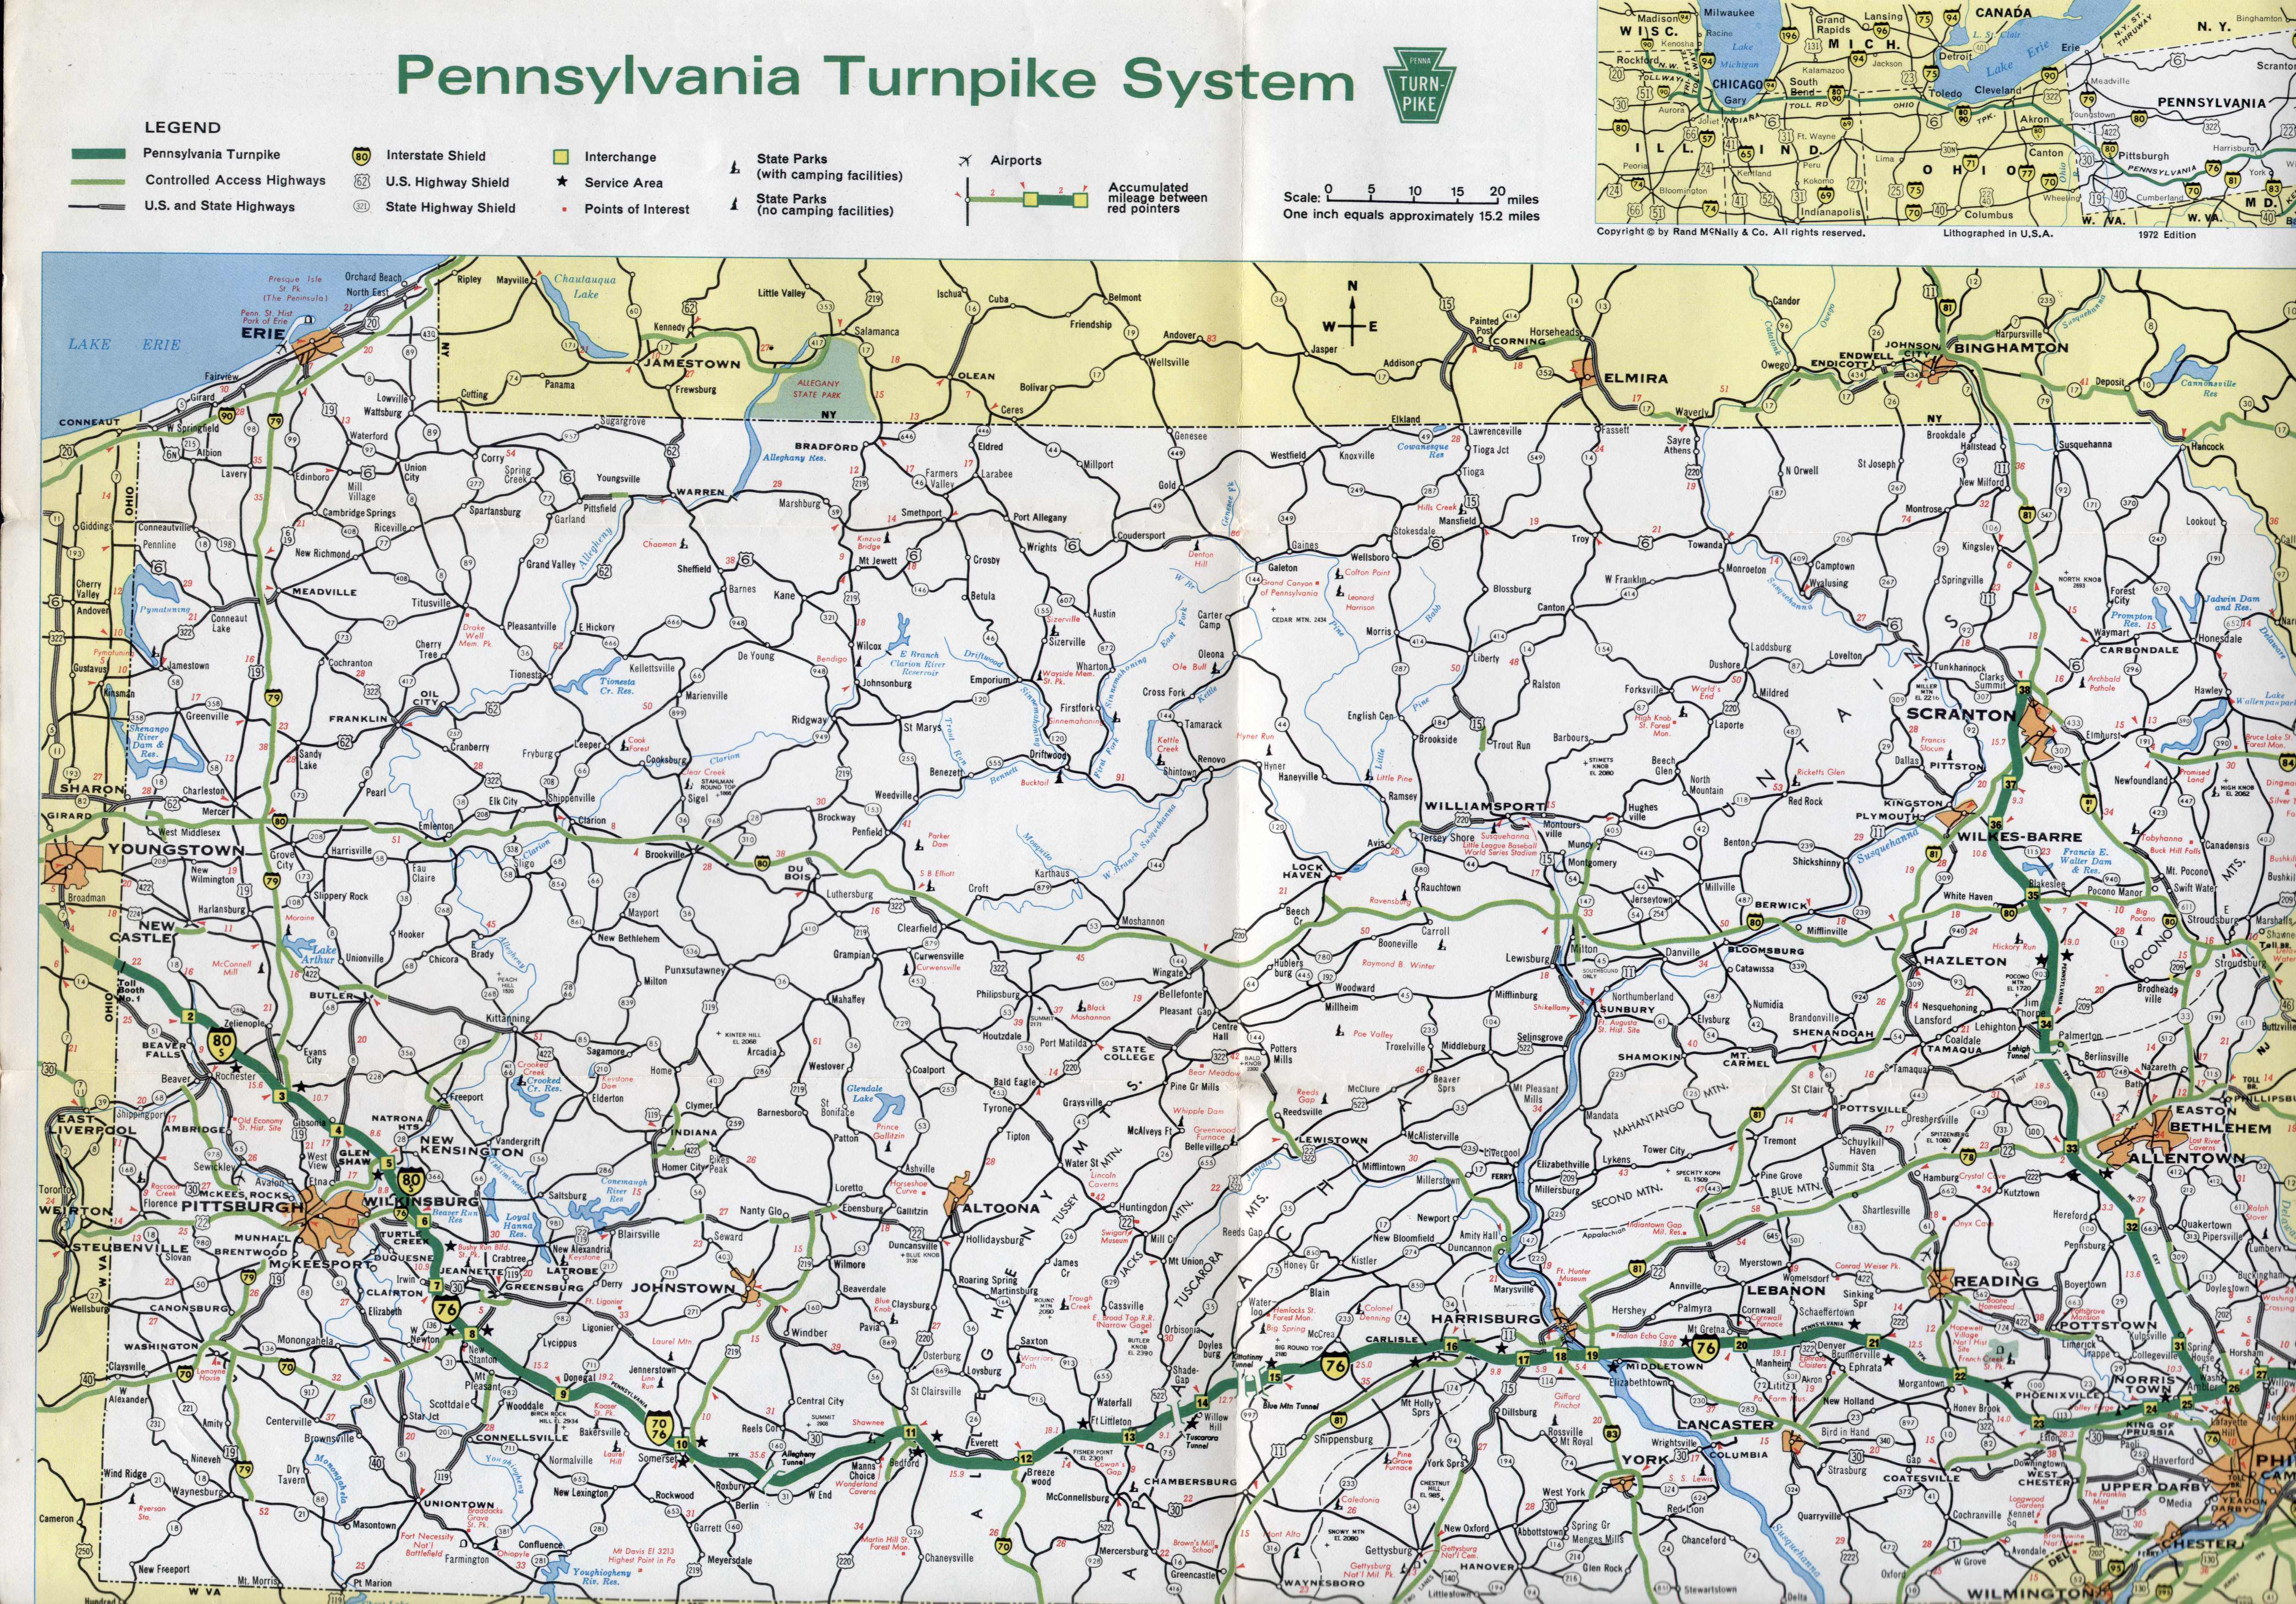 Large Detailed Pennsylvania State Turnpike System Map 1972